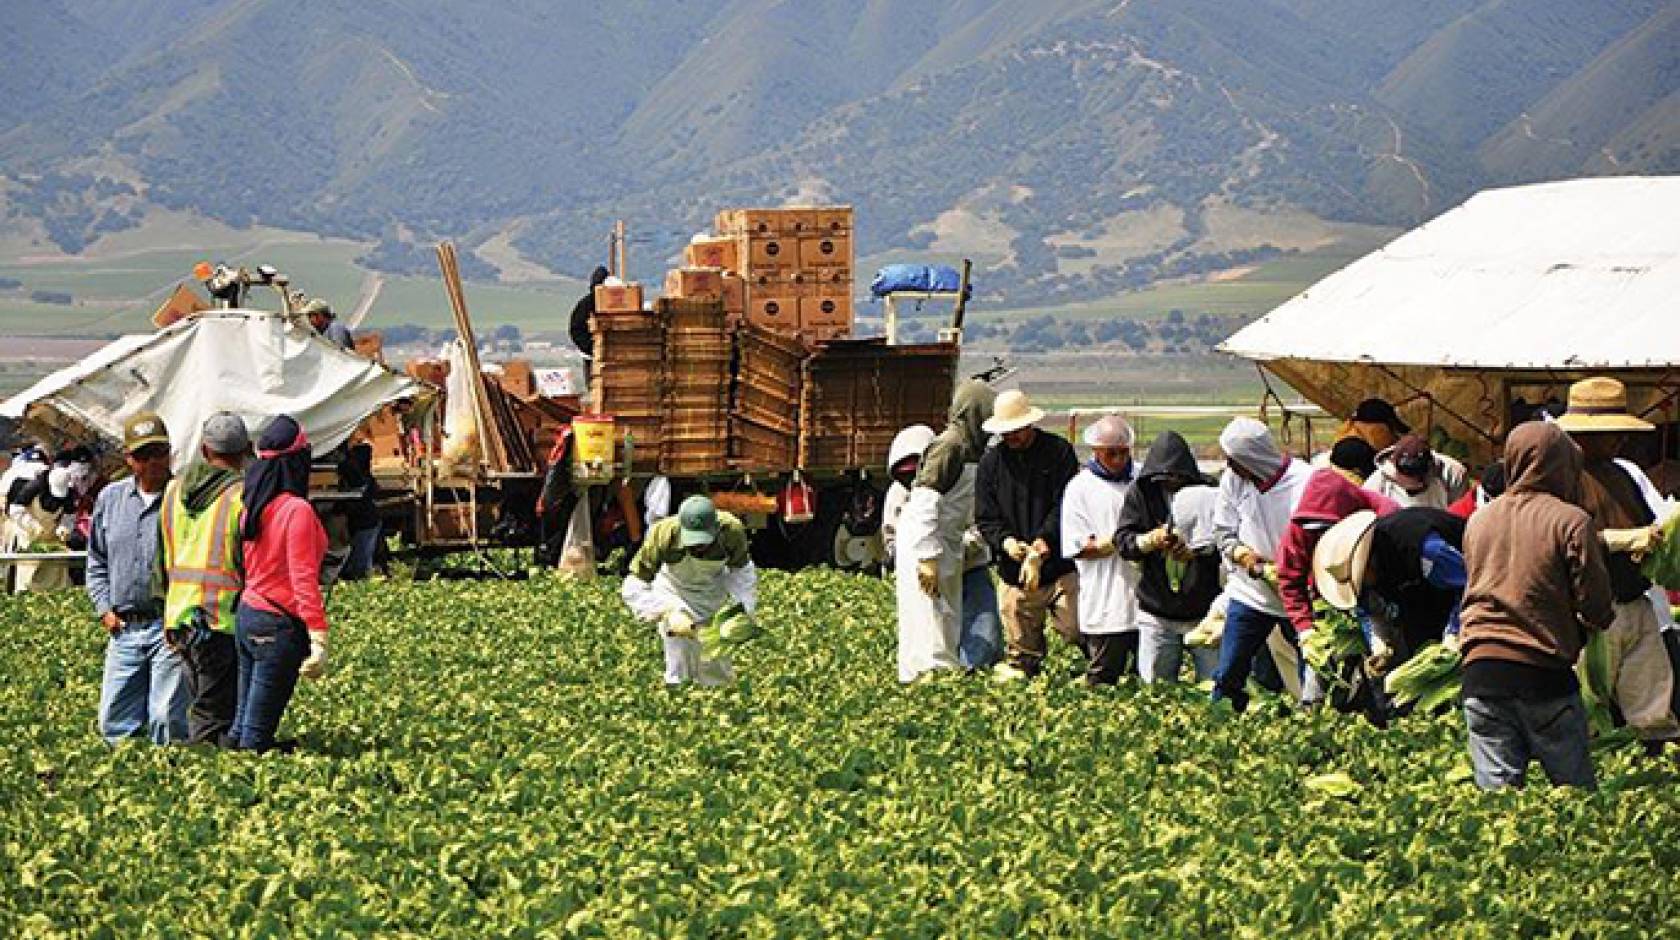 The center focuses on improving the health and safety of farmers and farmworkers like these shown harvesting a lettuce field. 